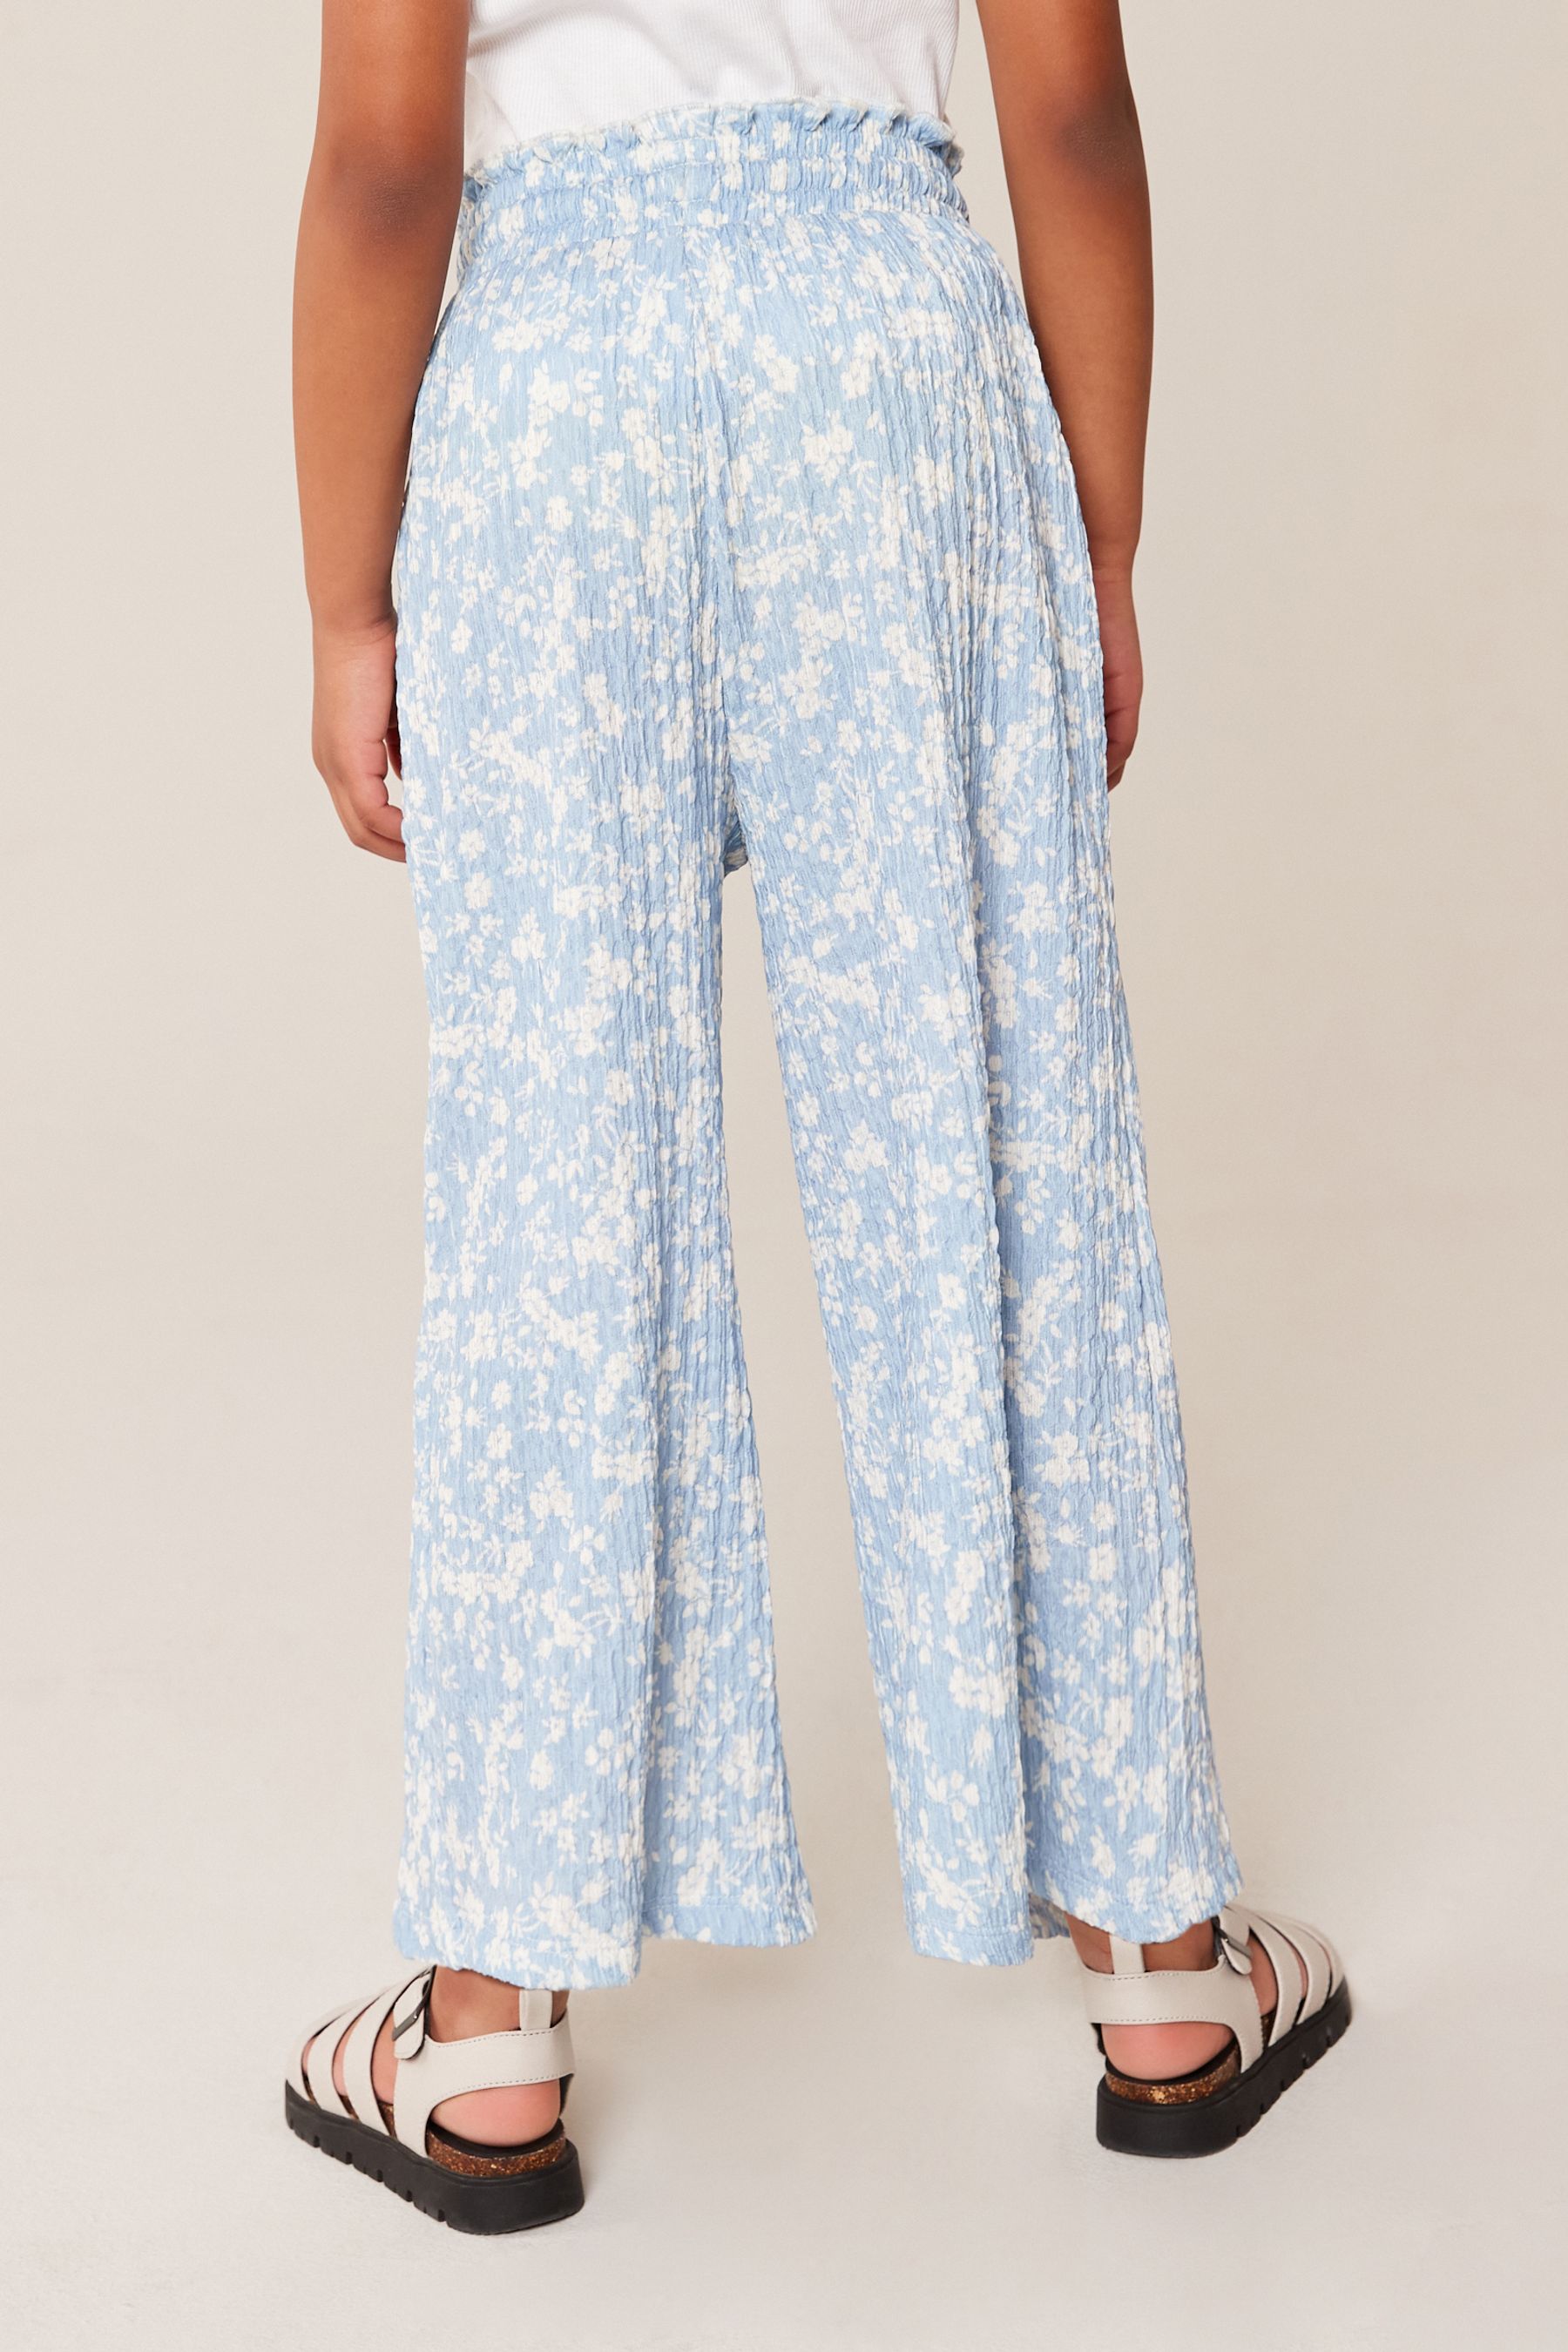 Buy Blue/ White Floral Print Crinkle Texture Jersey Wide Leg Trousers ...